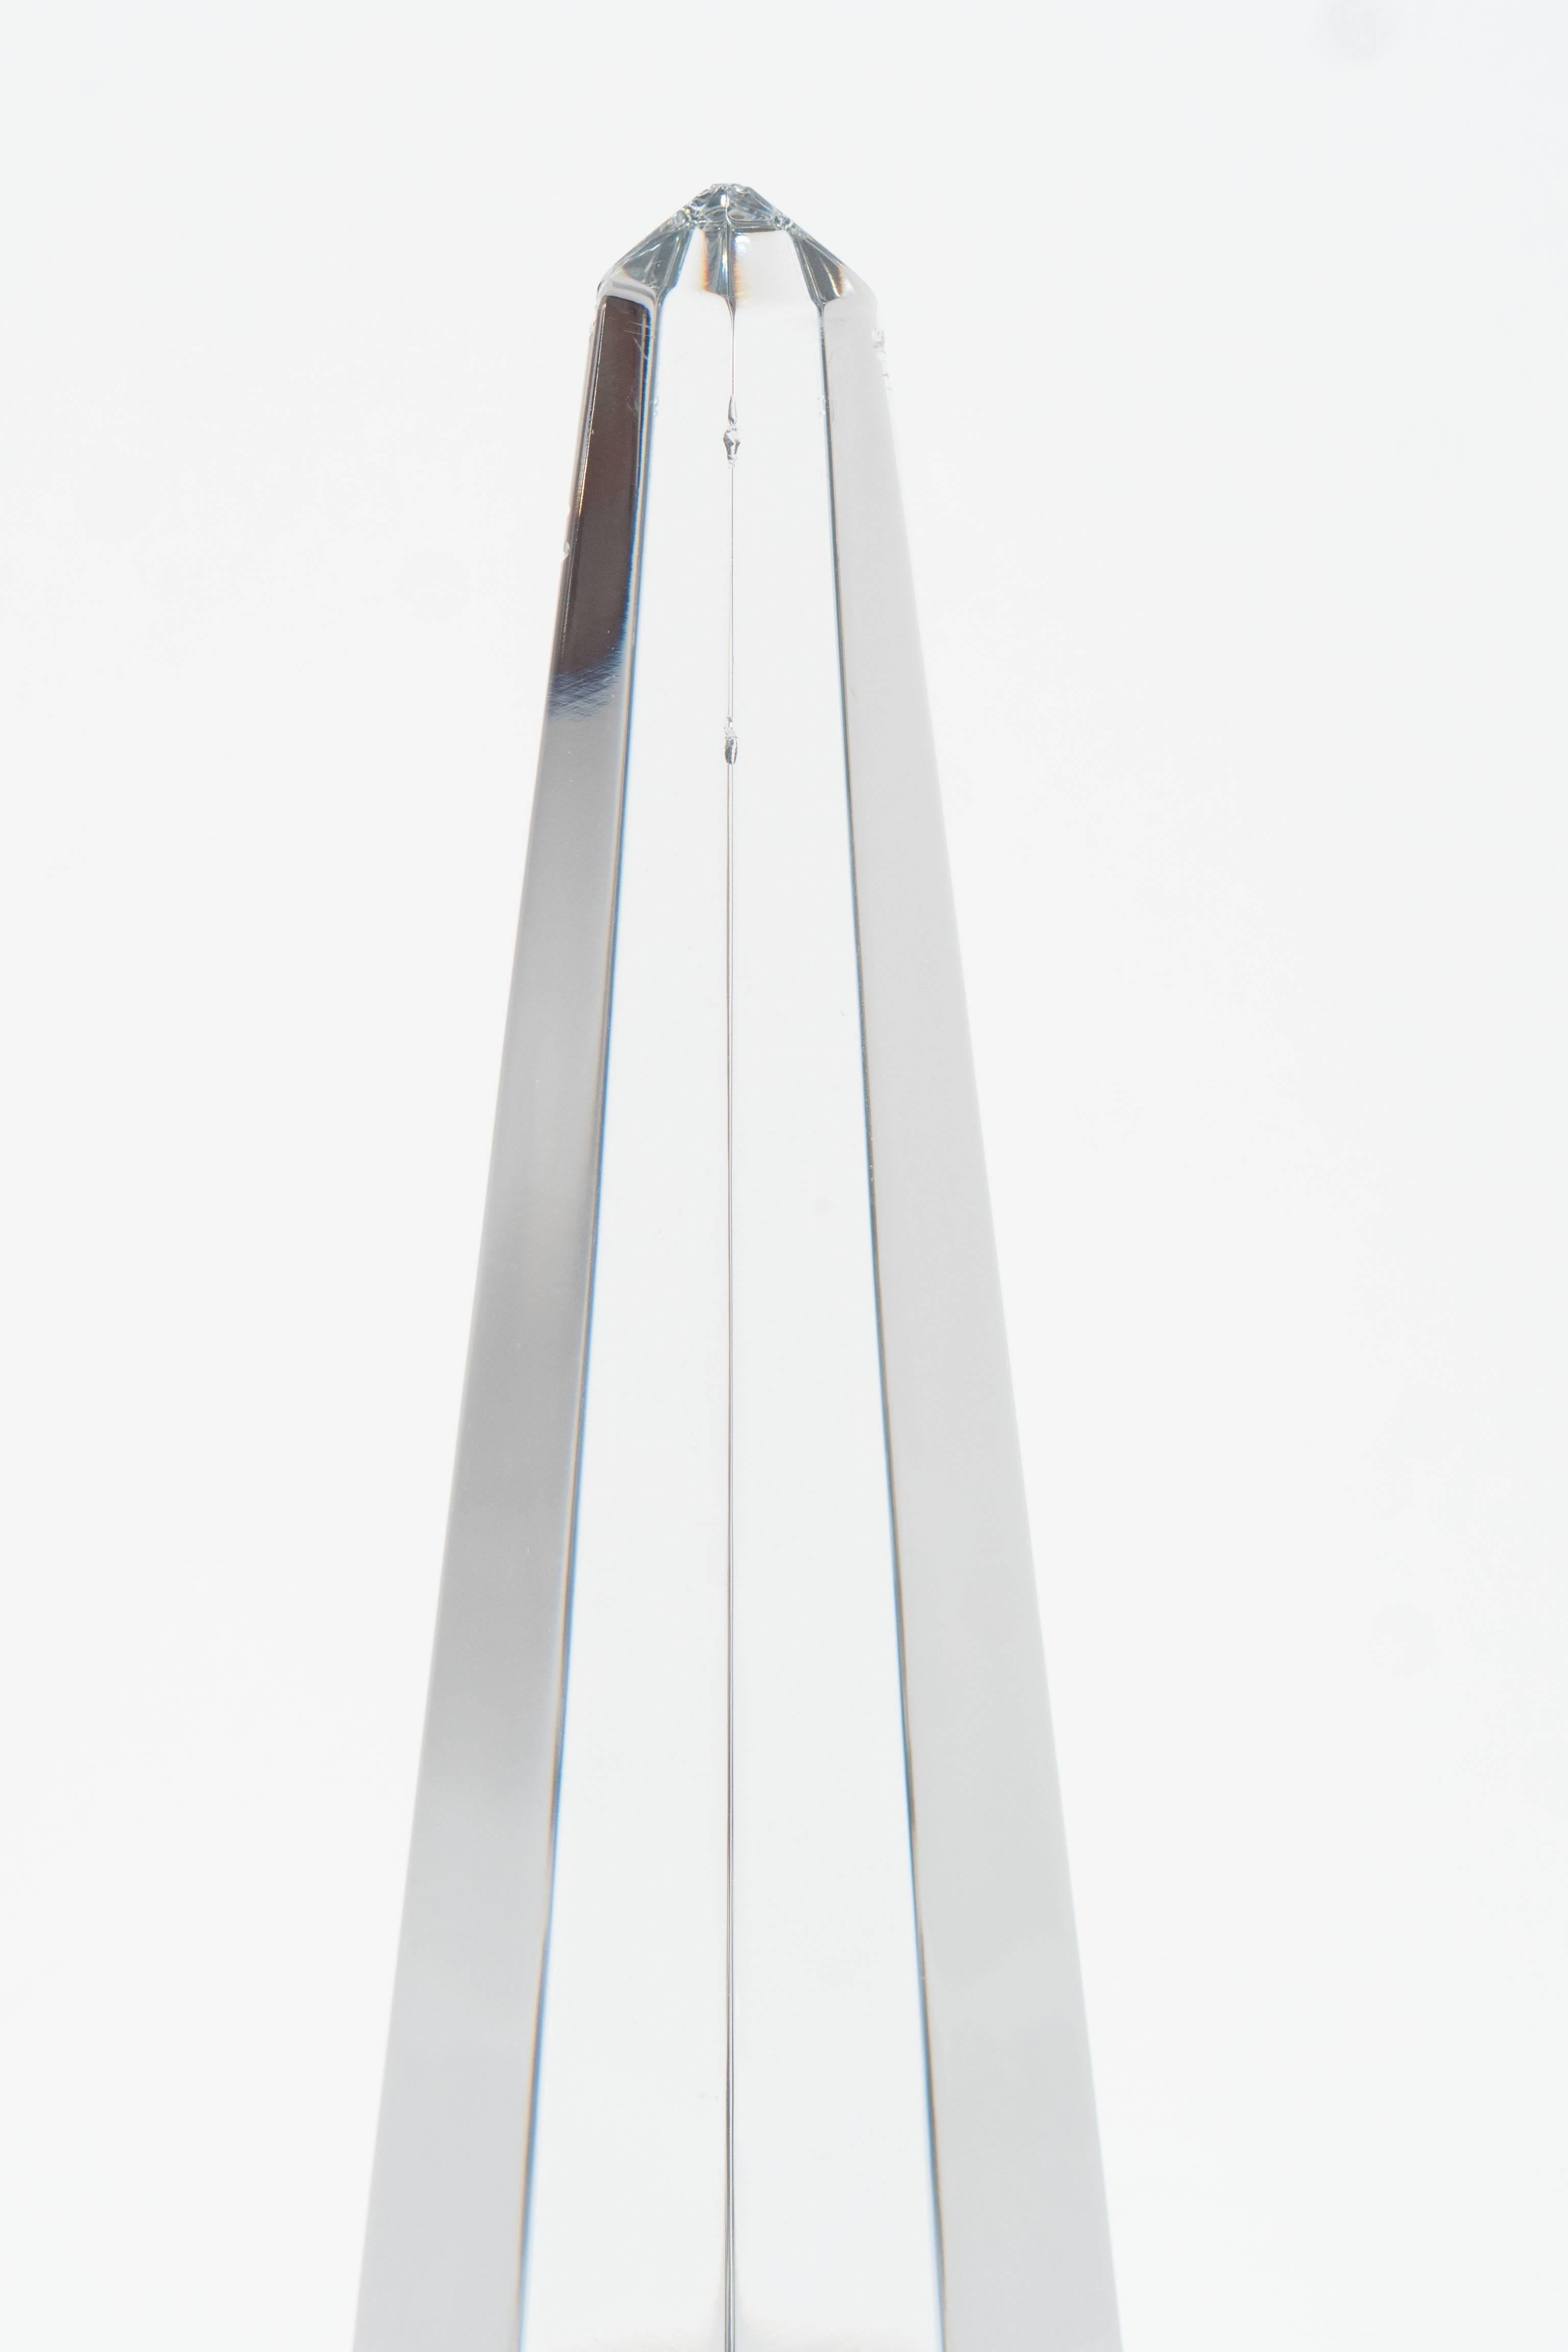 French Mid-Modernist Crystal Obelisk by Baccarat with Faceted Detailing